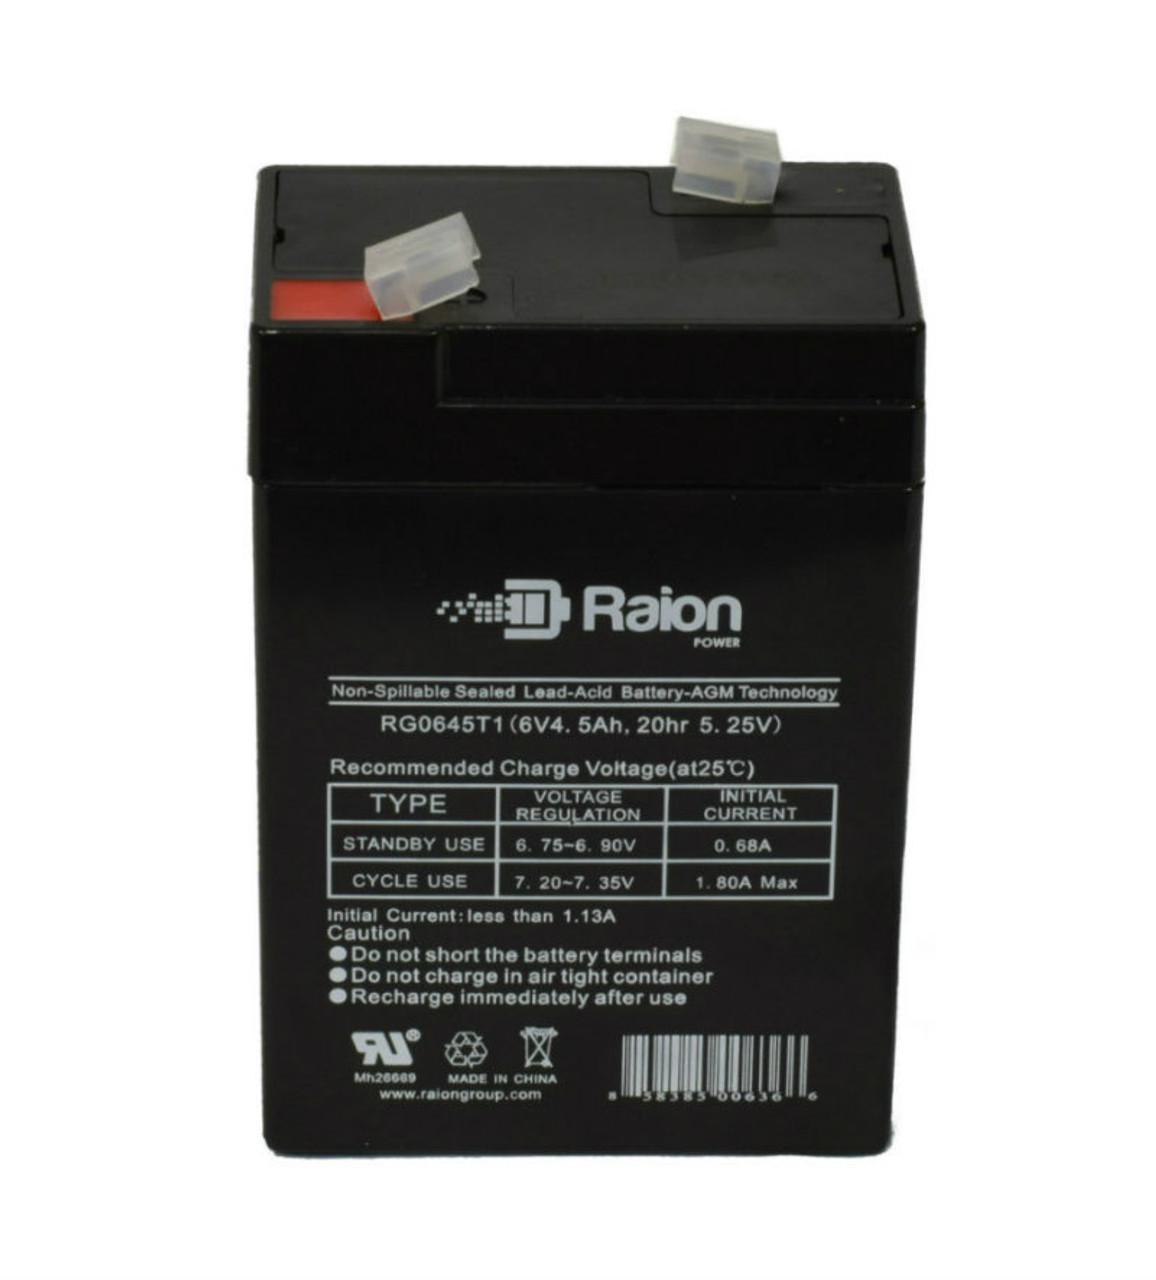 Raion Power RG0645T1 Replacement Battery Cartridge for XNB SN06004.5